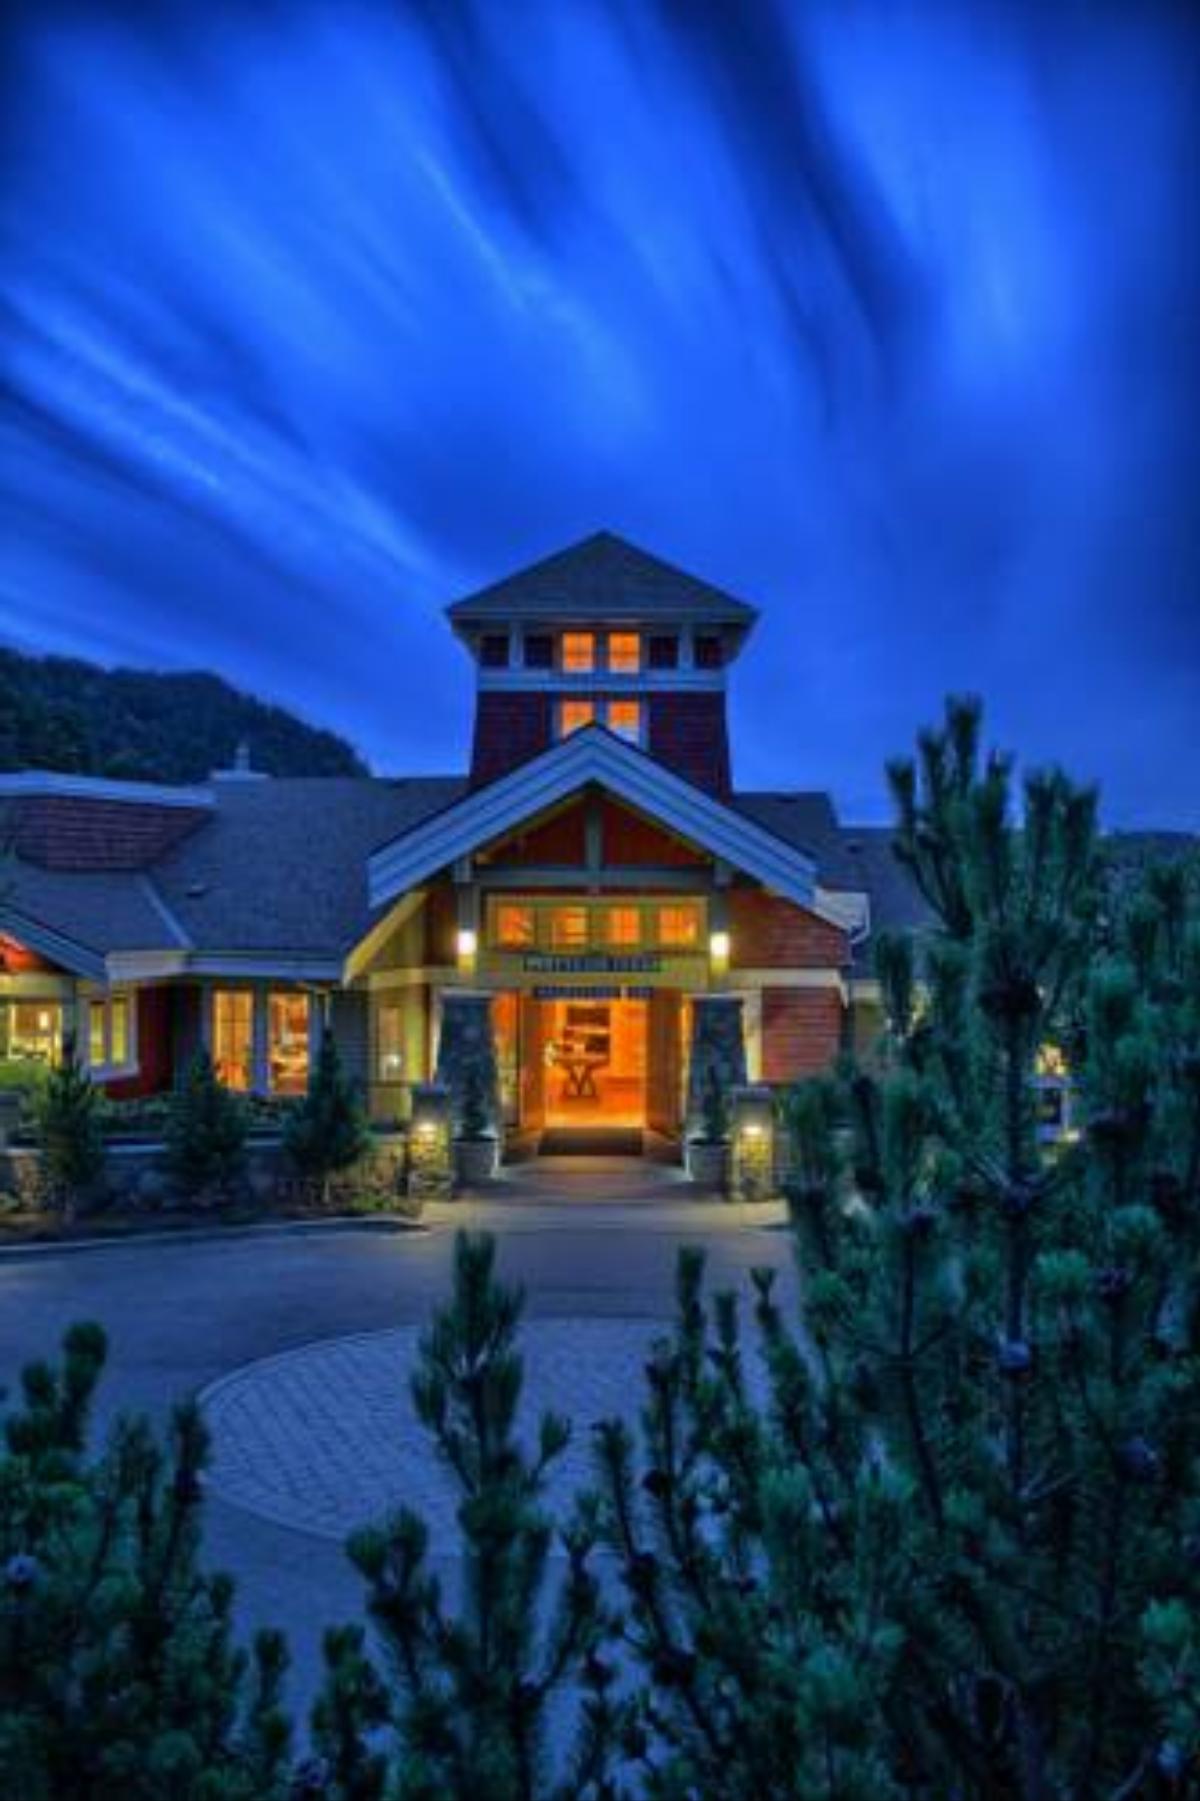 Poets Cove Resort & Spa Hotel Bedwell Harbour Canada